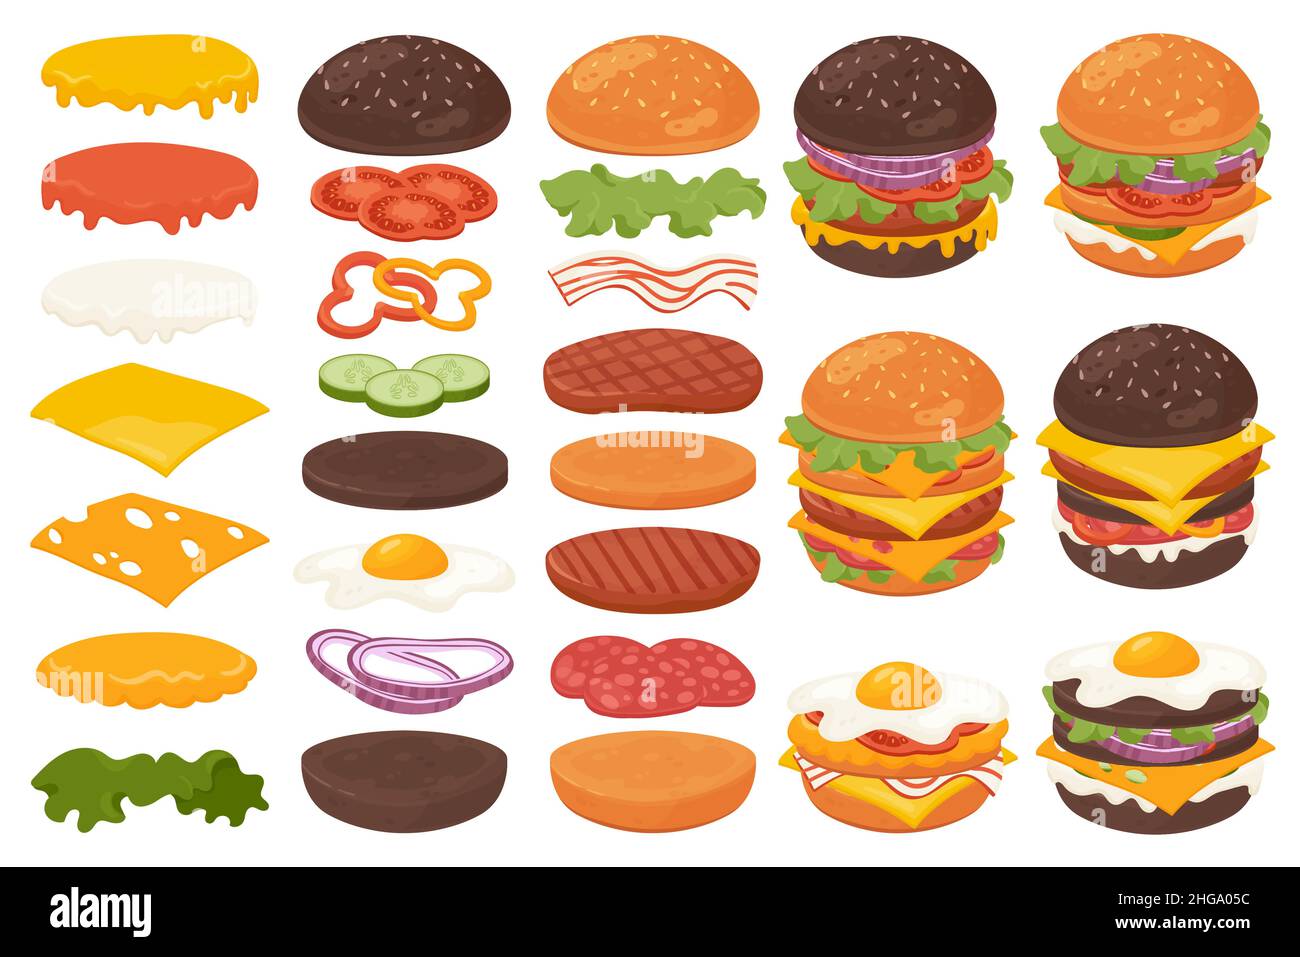 Burger or sandwich ingredients set vector illustration. Cartoon restaurant food menu with tasty beef cutlet and chorizo bacon, slices of cheddar cheese, veggie and in sauces in bun isolated on white Stock Vector